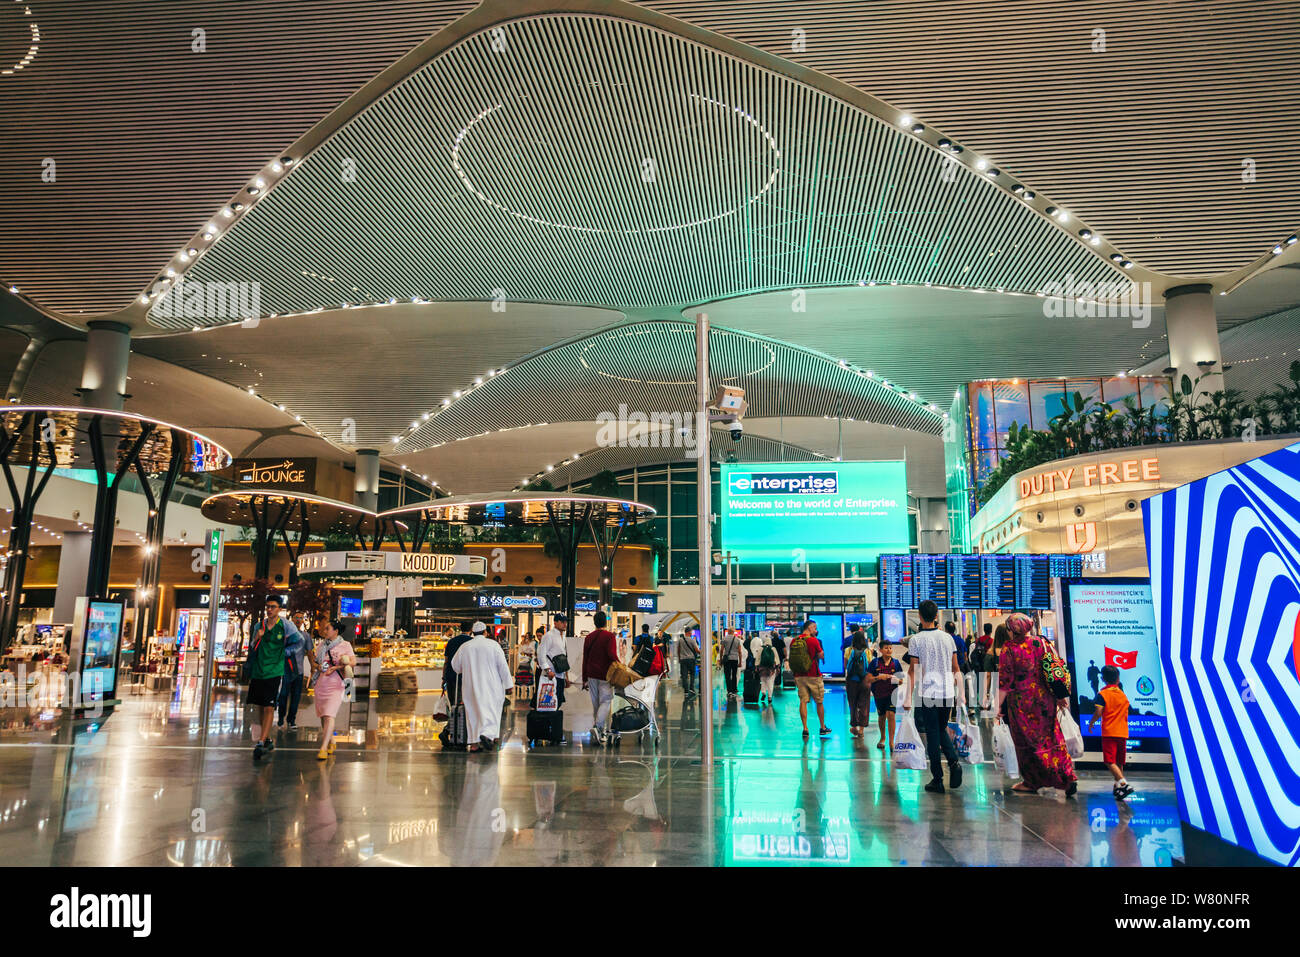 istanbul turkey august 02 2019 interior view of the istanbul new airport new istanbul airport is the main international airport located in istanbu stock photo alamy